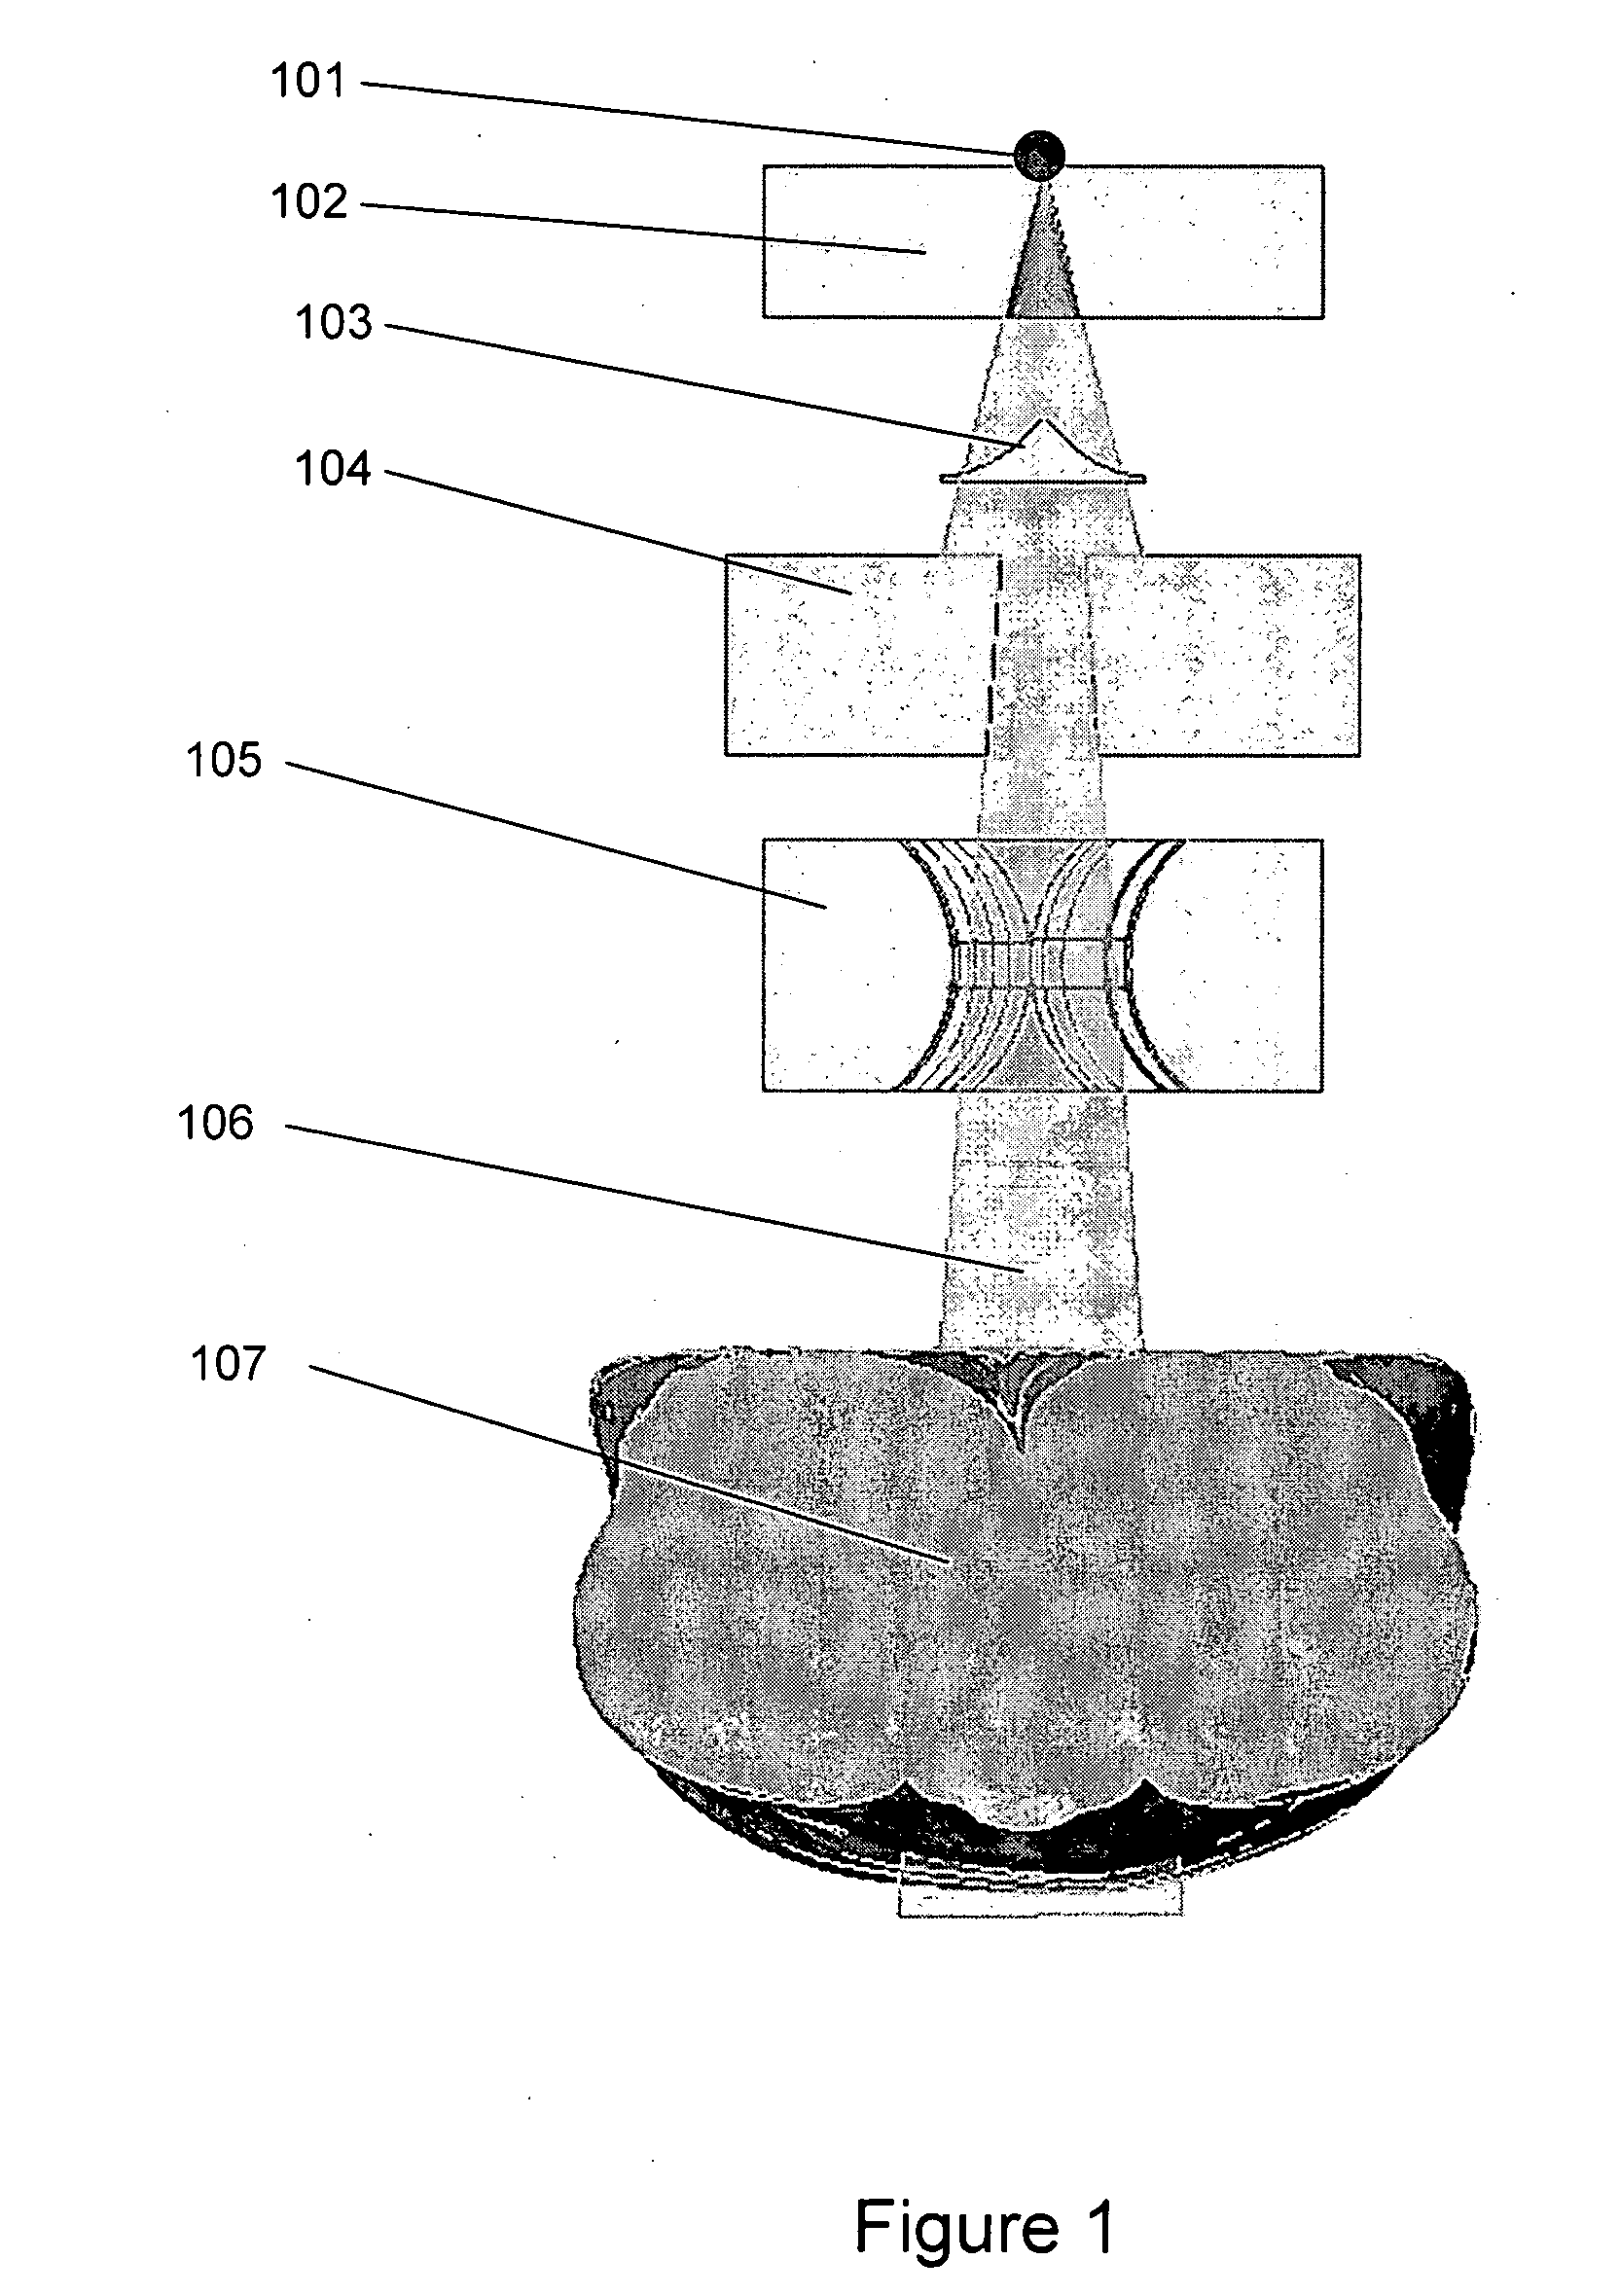 Method for calculation radiation doses from acquired image data